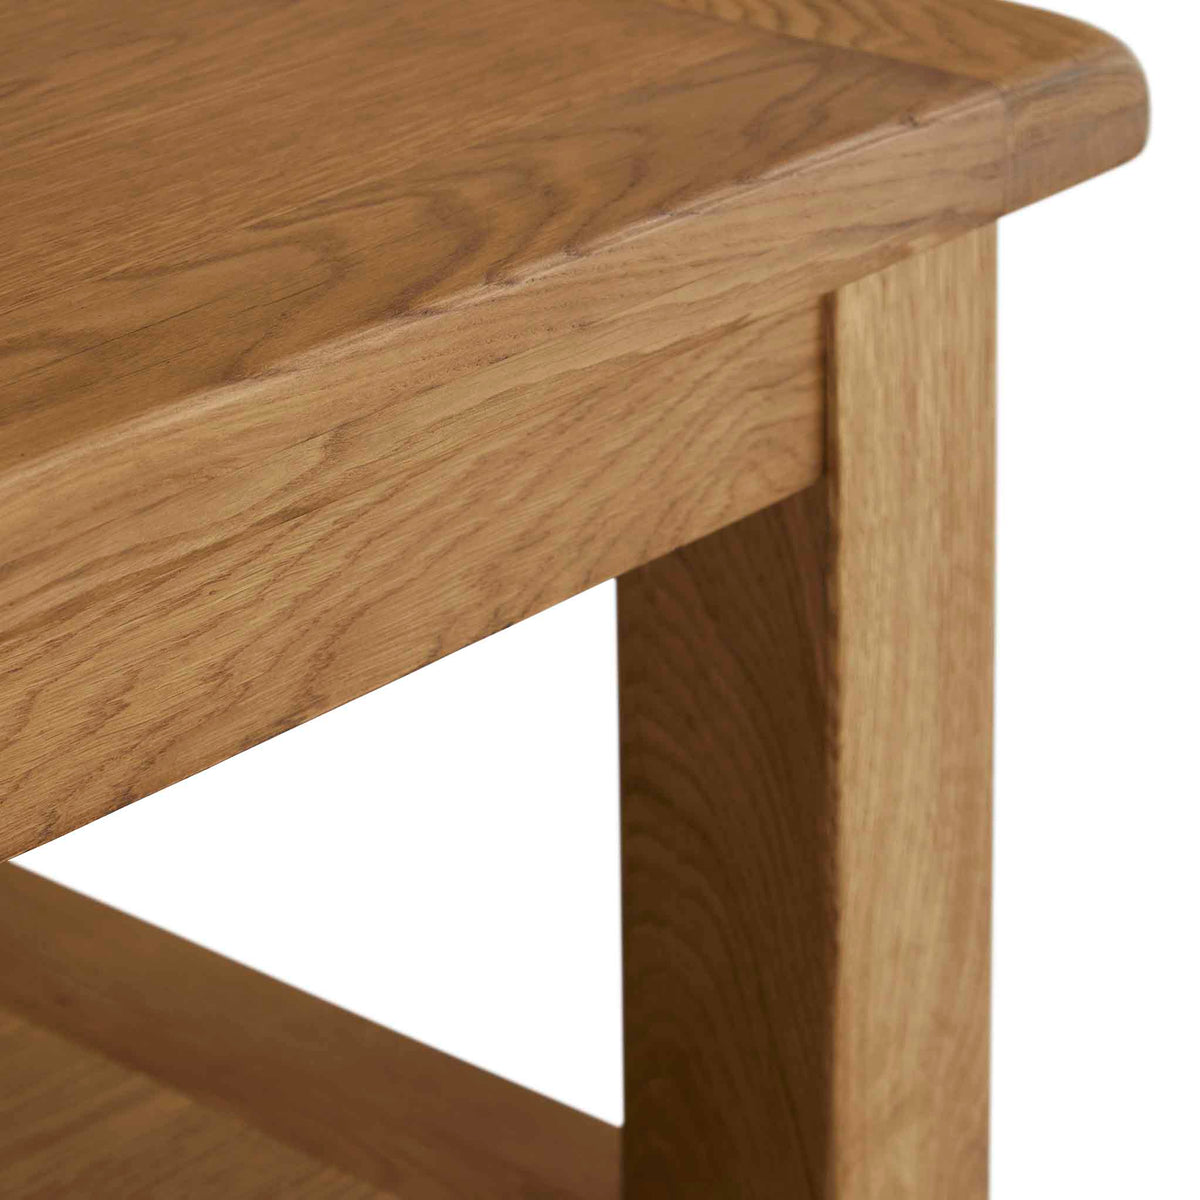 Zelah Oak Coffee Table - Close up of corner of table and leg